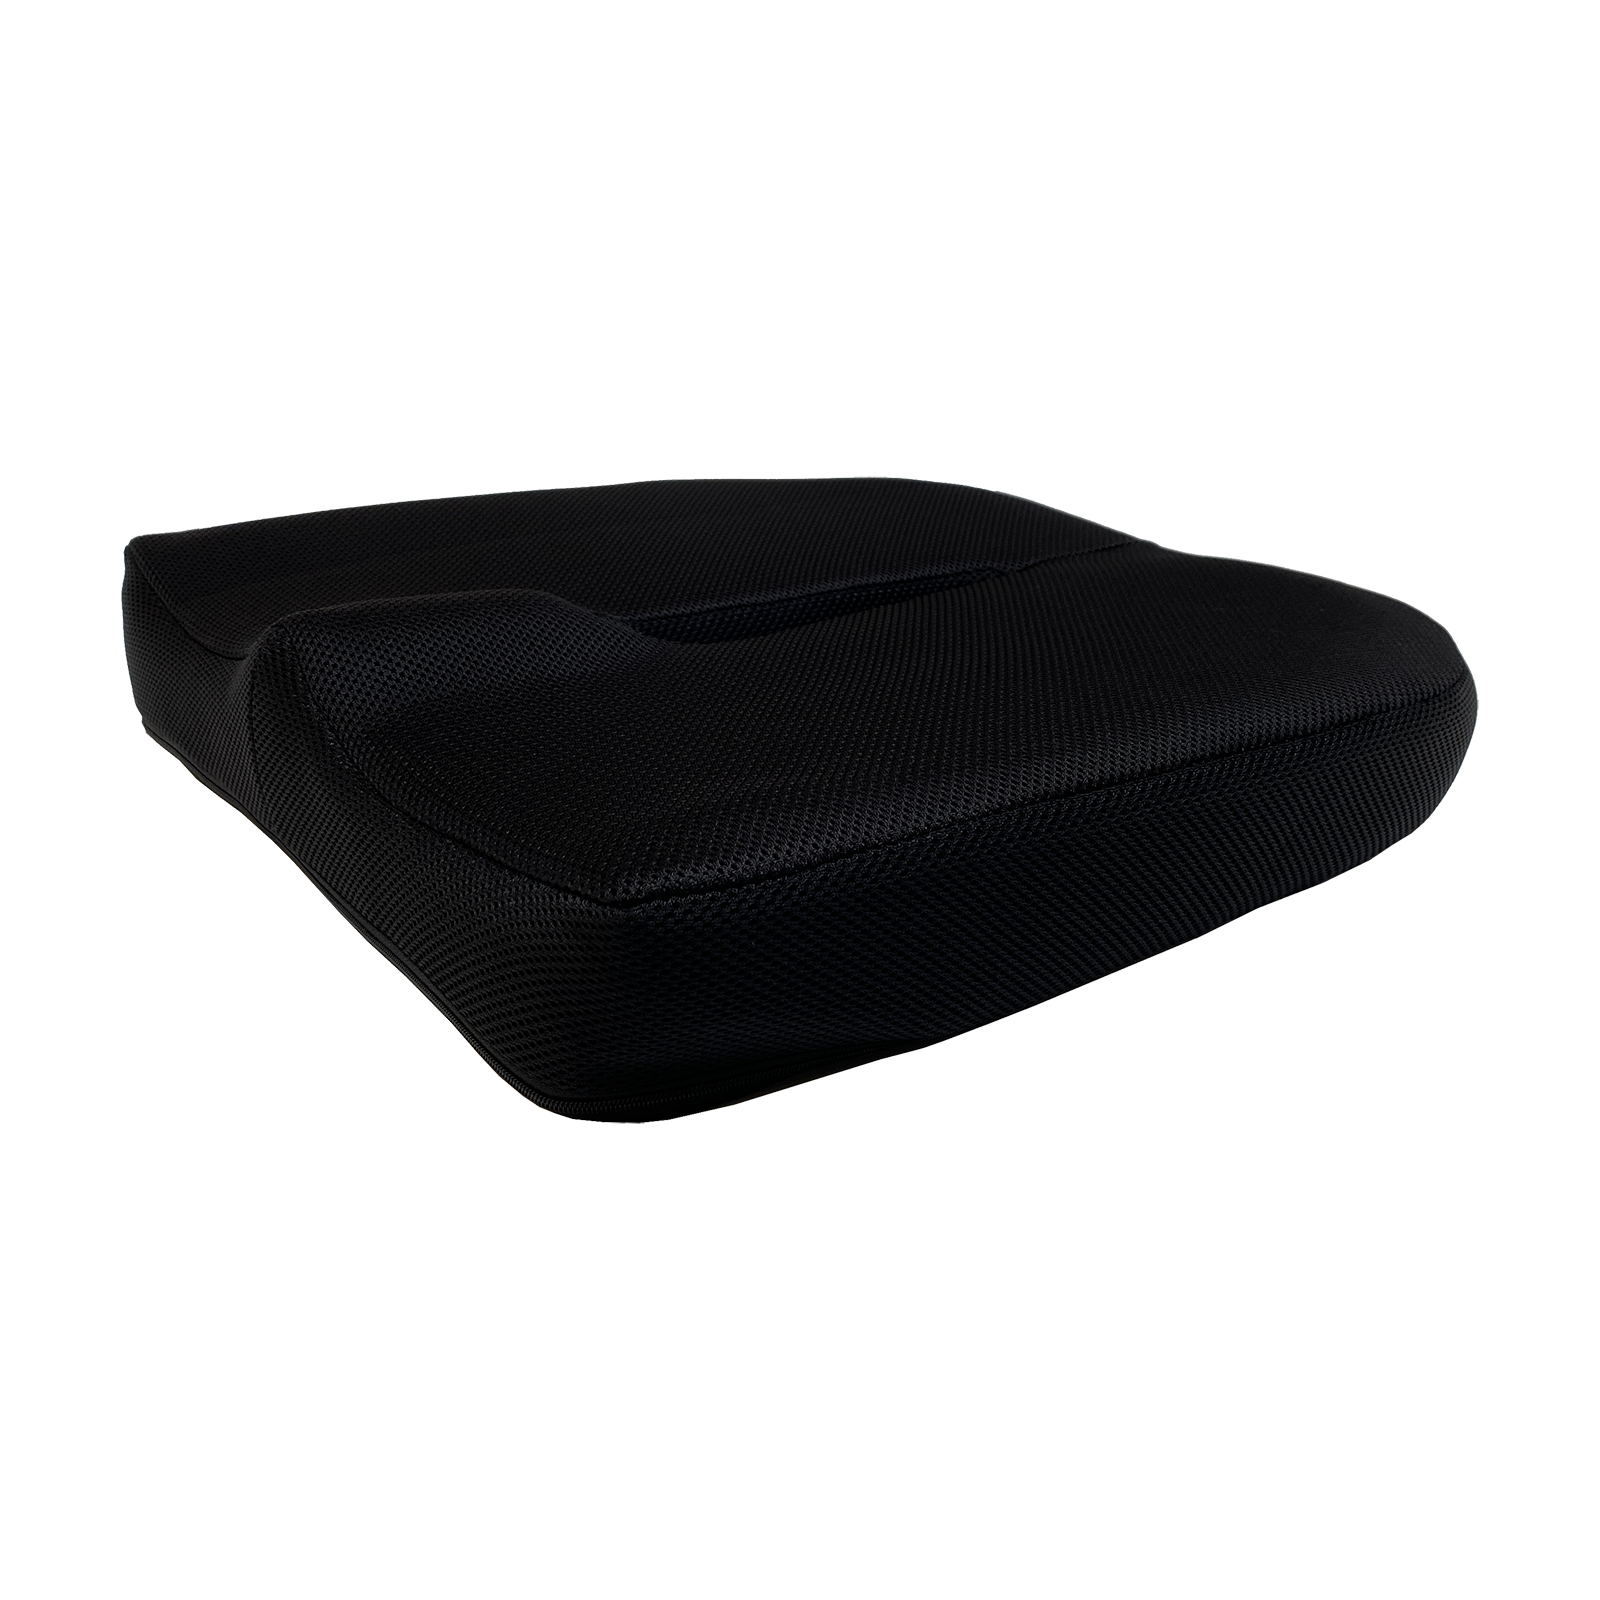 13 Best Gel Seat Cushions for sitting Long Hours in 2023